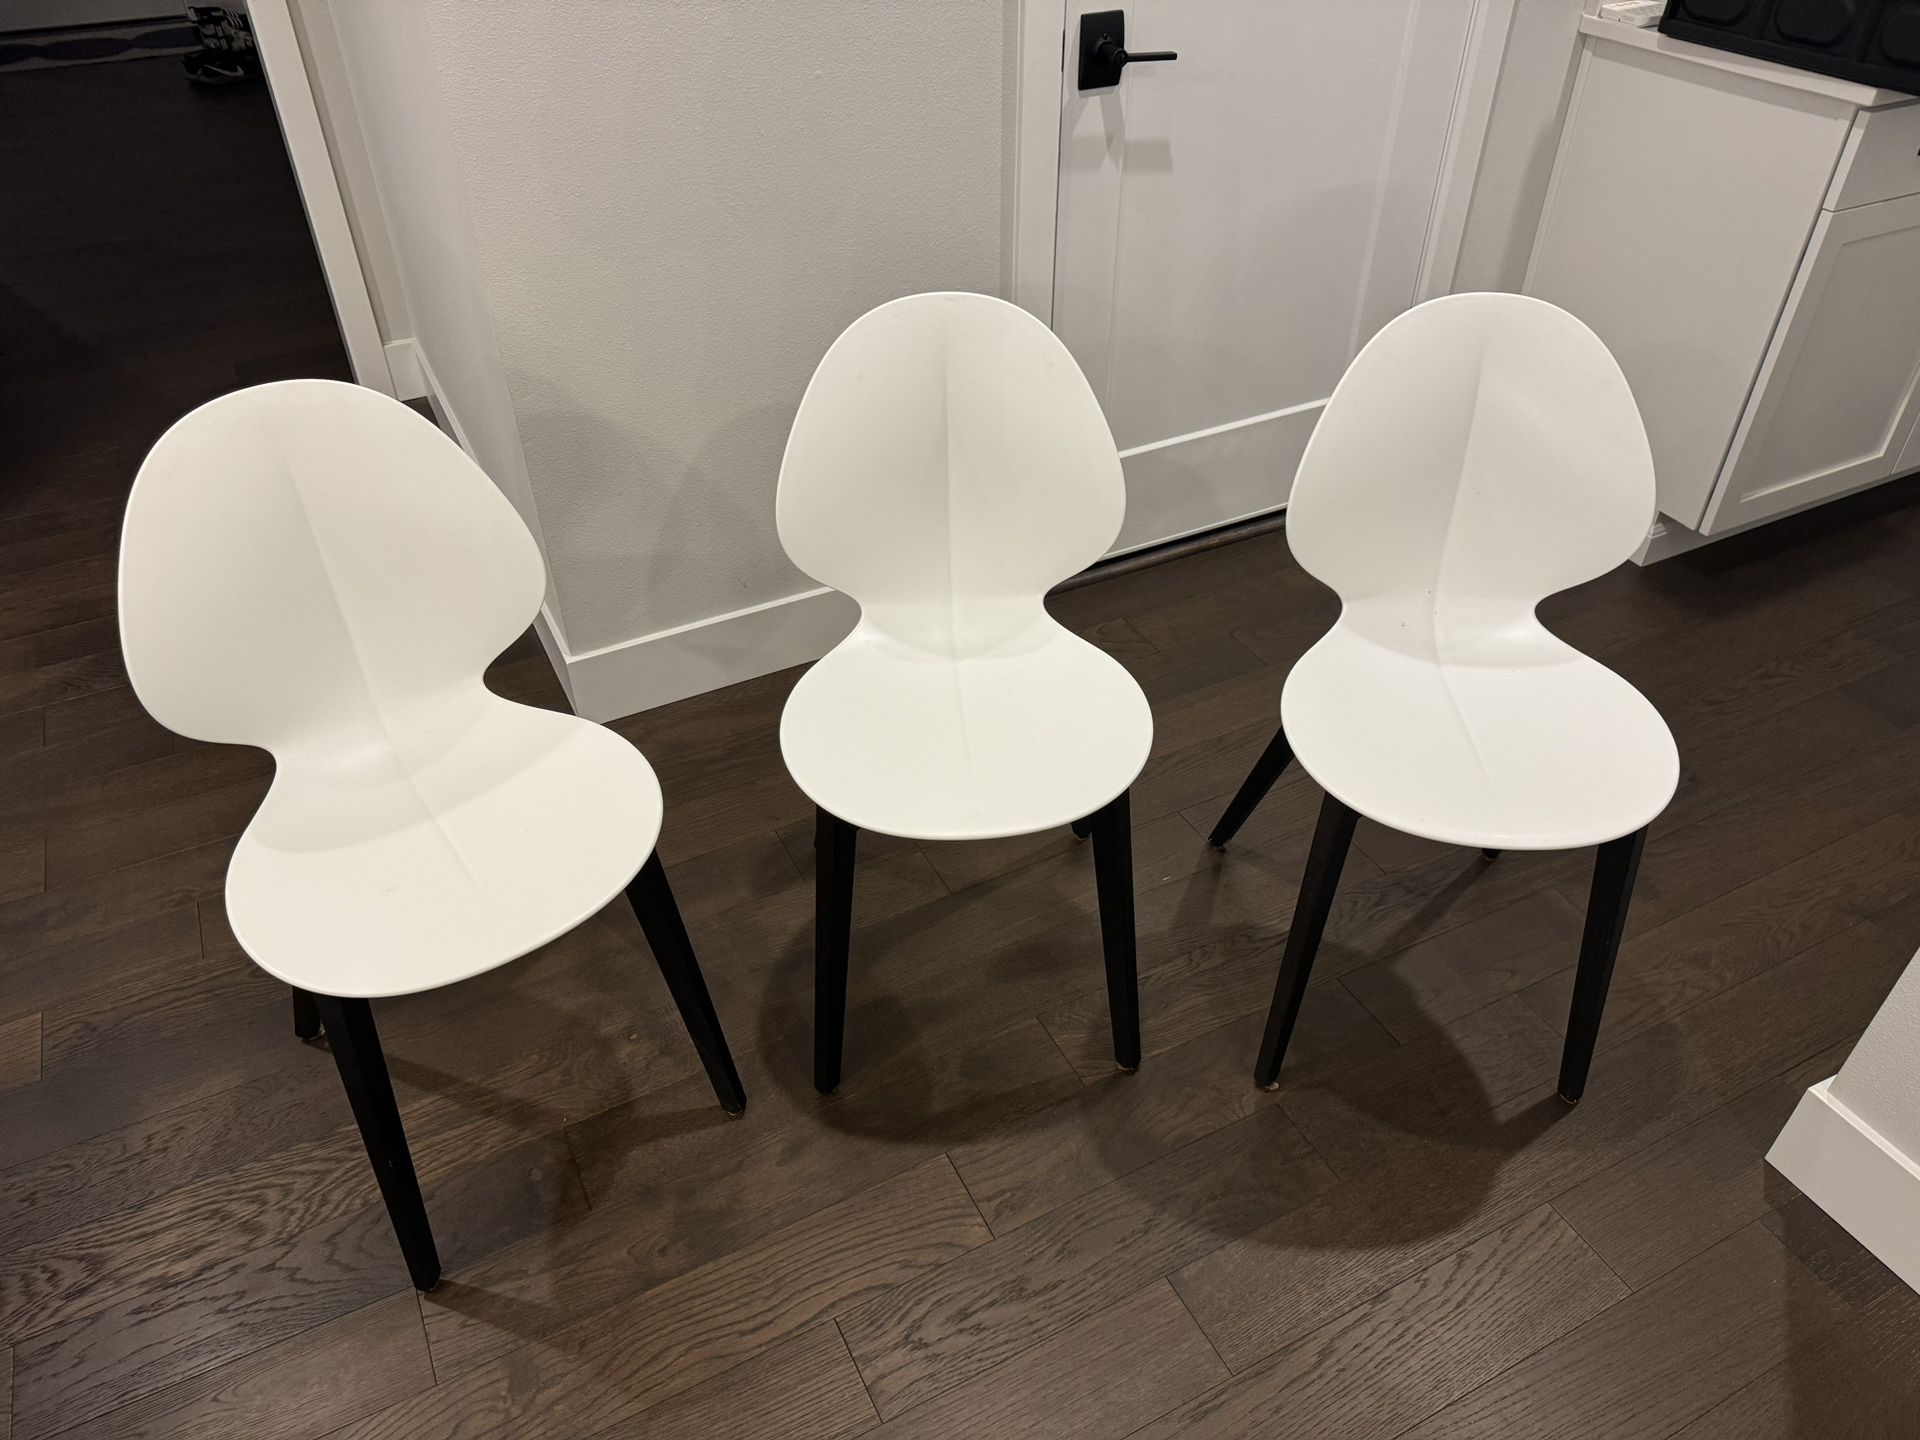 BASIL chairs / Dining chairs, Used